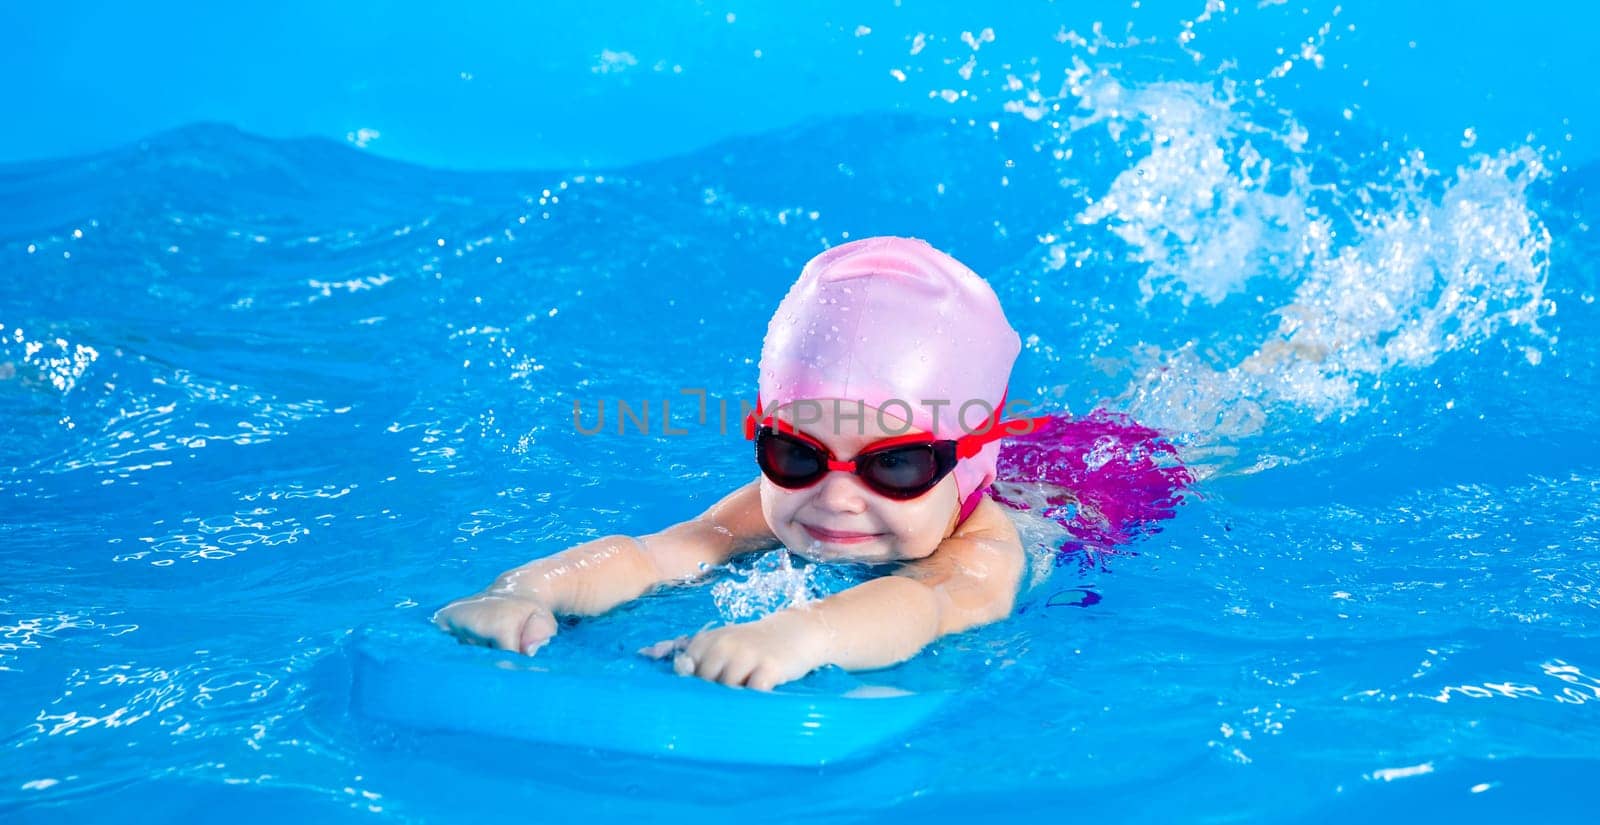 Little girl learning to swim in indoor pool with pool floating board